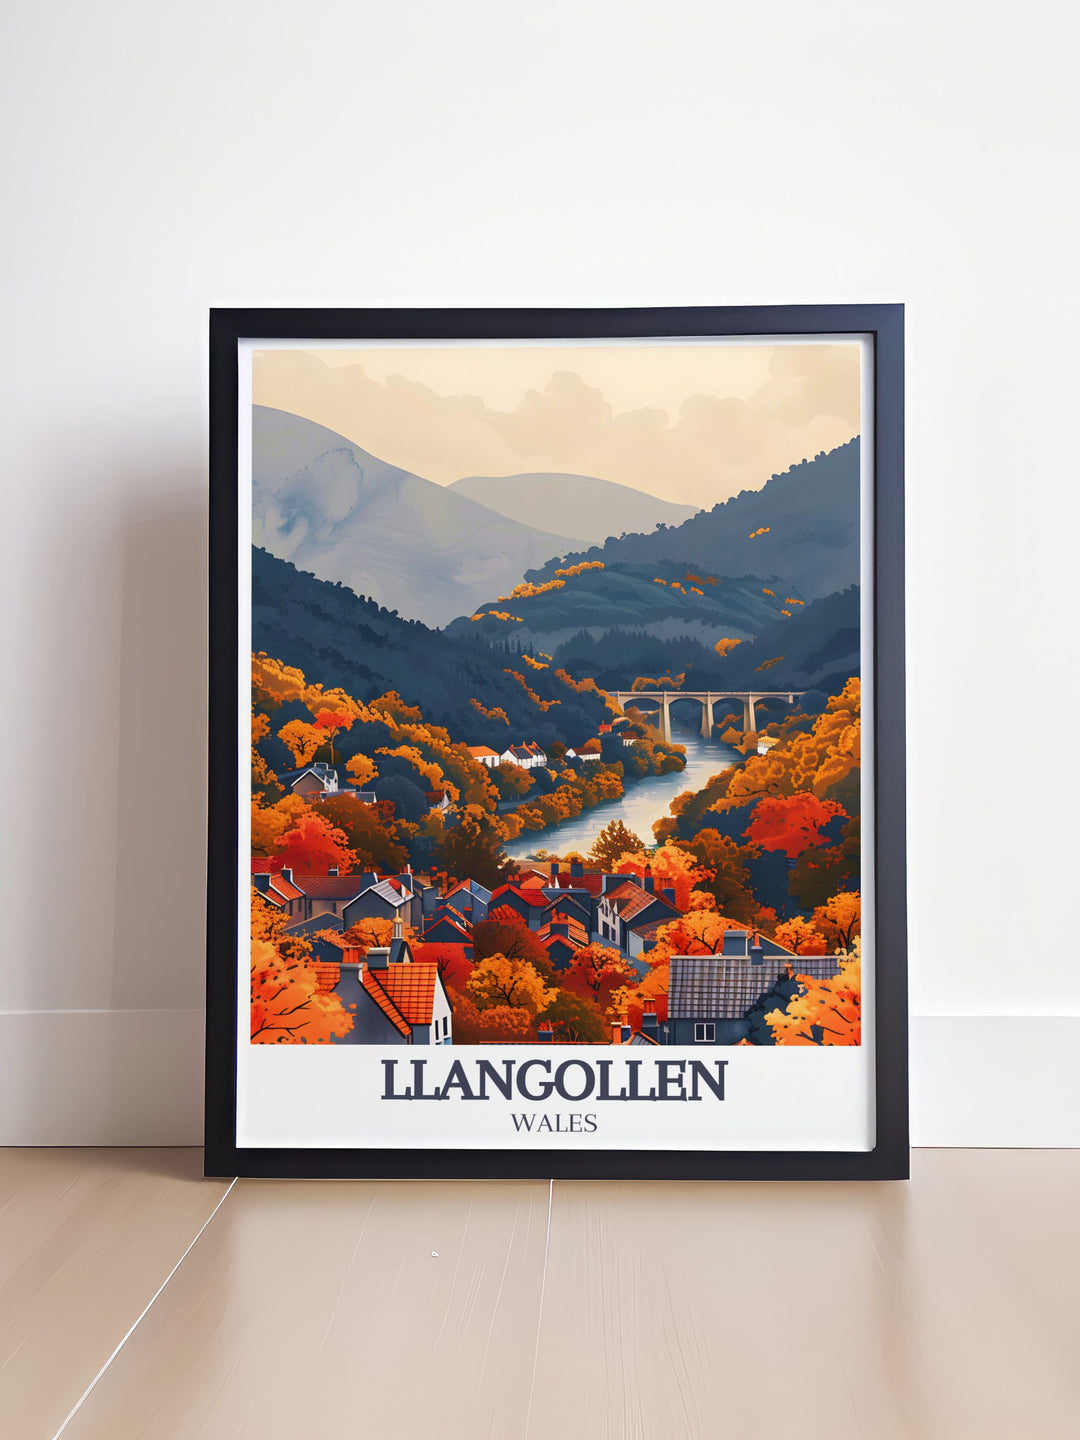 Showcase Llangollens charm with this wall art of River Dee and Pontcysyllte Aqueduct, ideal for Wales artwork enthusiasts.